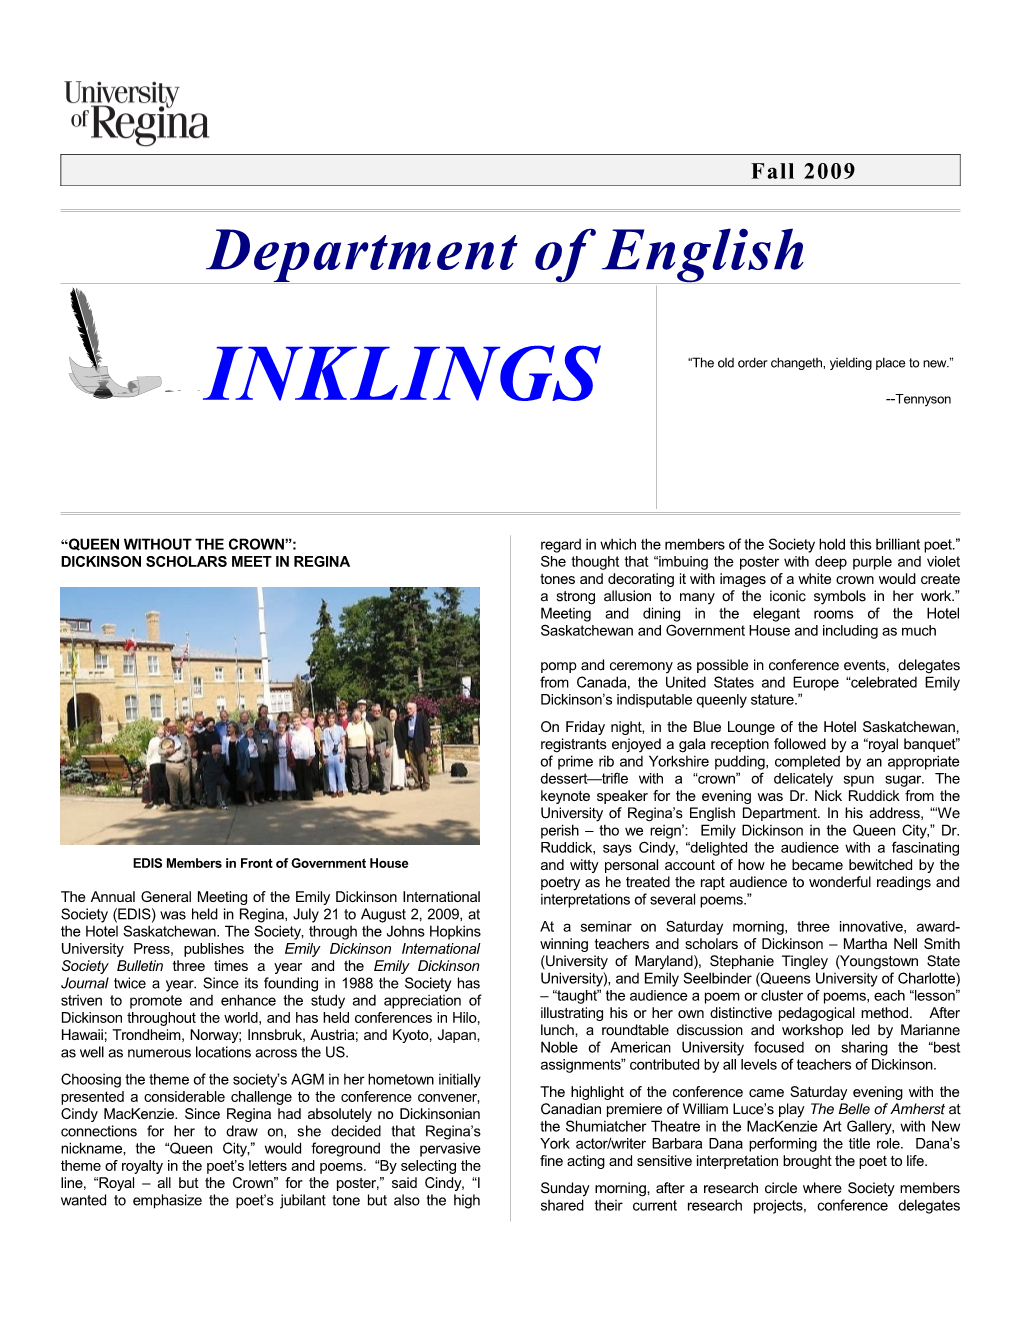 INKLINGS FALL 2009 Page 4